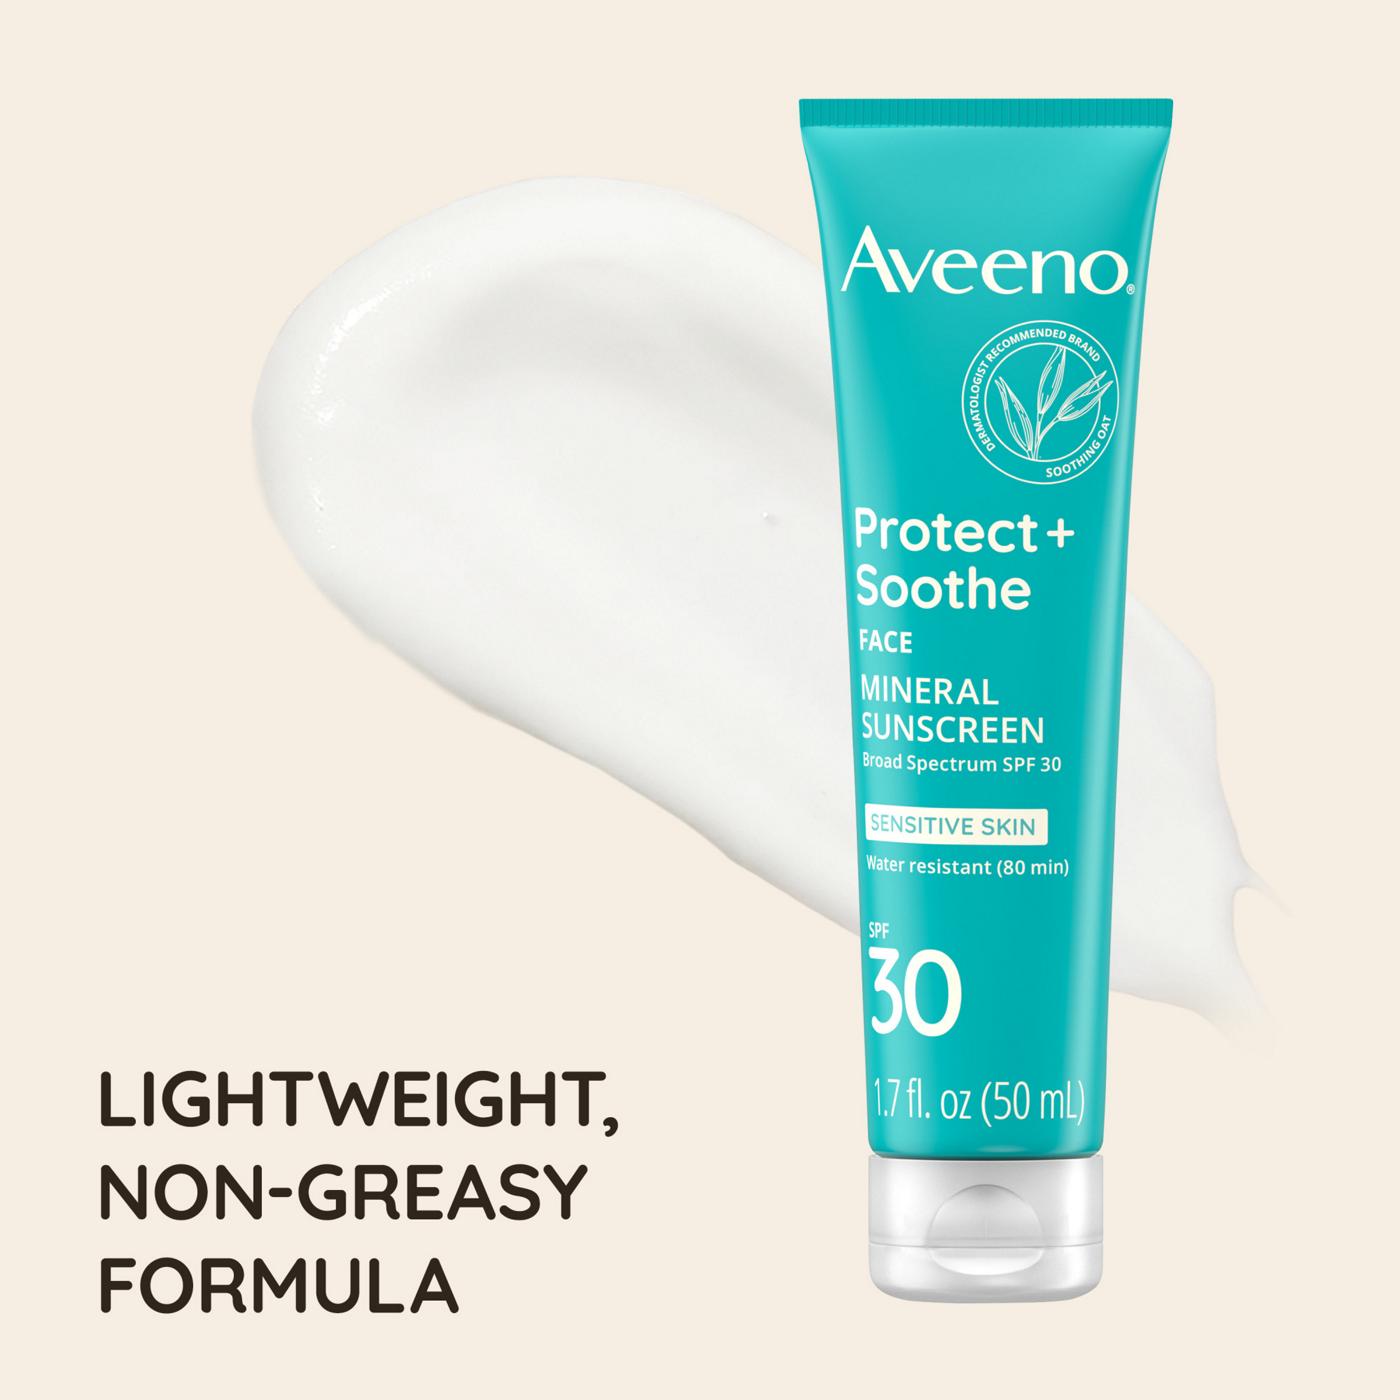 Aveeno Protect + Soothe Face Mineral Sunscreen SPF 30; image 3 of 9